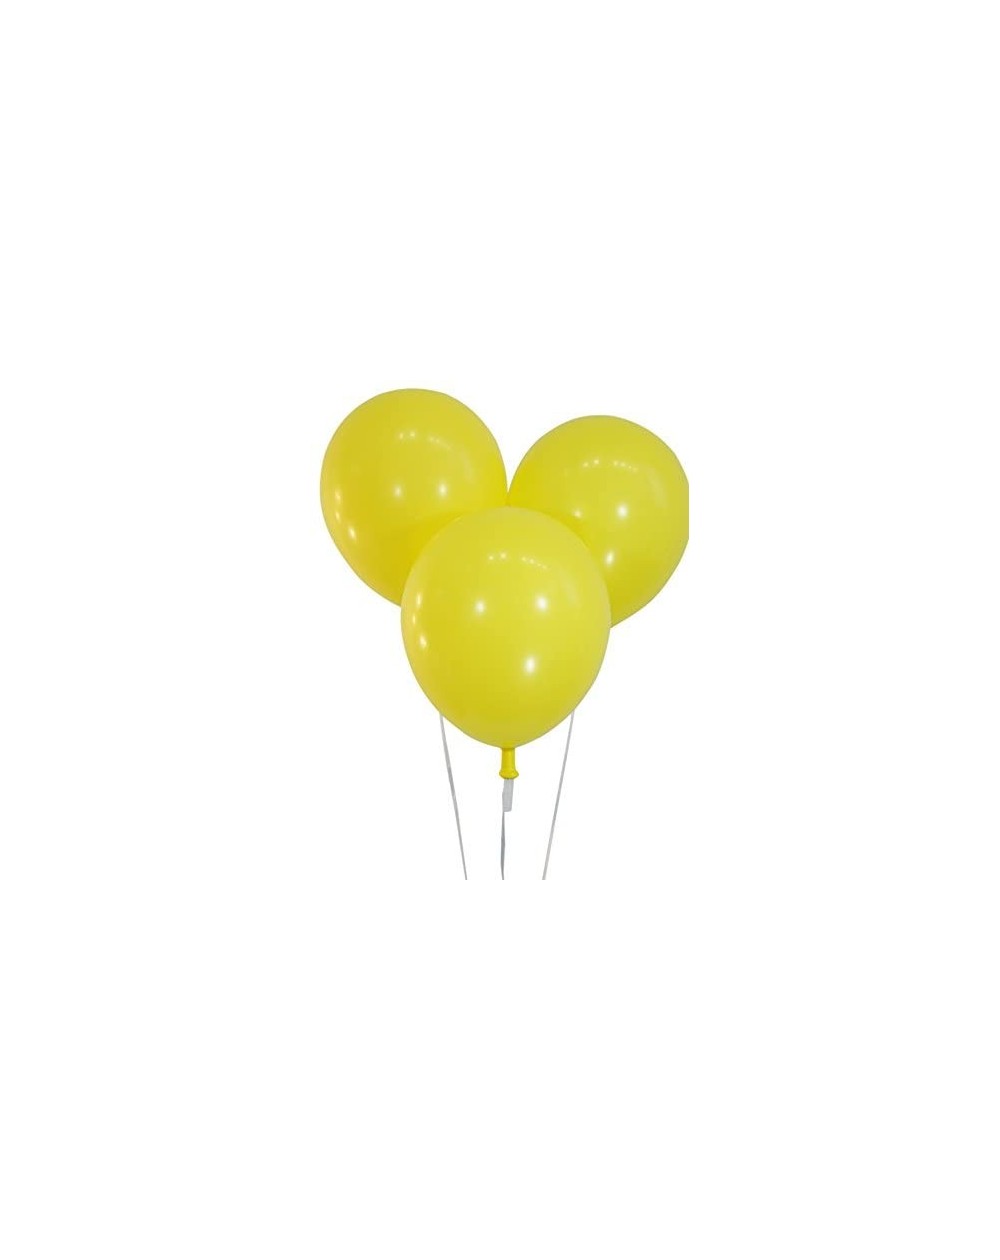 Balloons Creative Balloons 12" Latex Balloons - Pack of 100 Pieces - Pastel Yellow - Pastel Yellow - CK12MCT7V1J $30.48